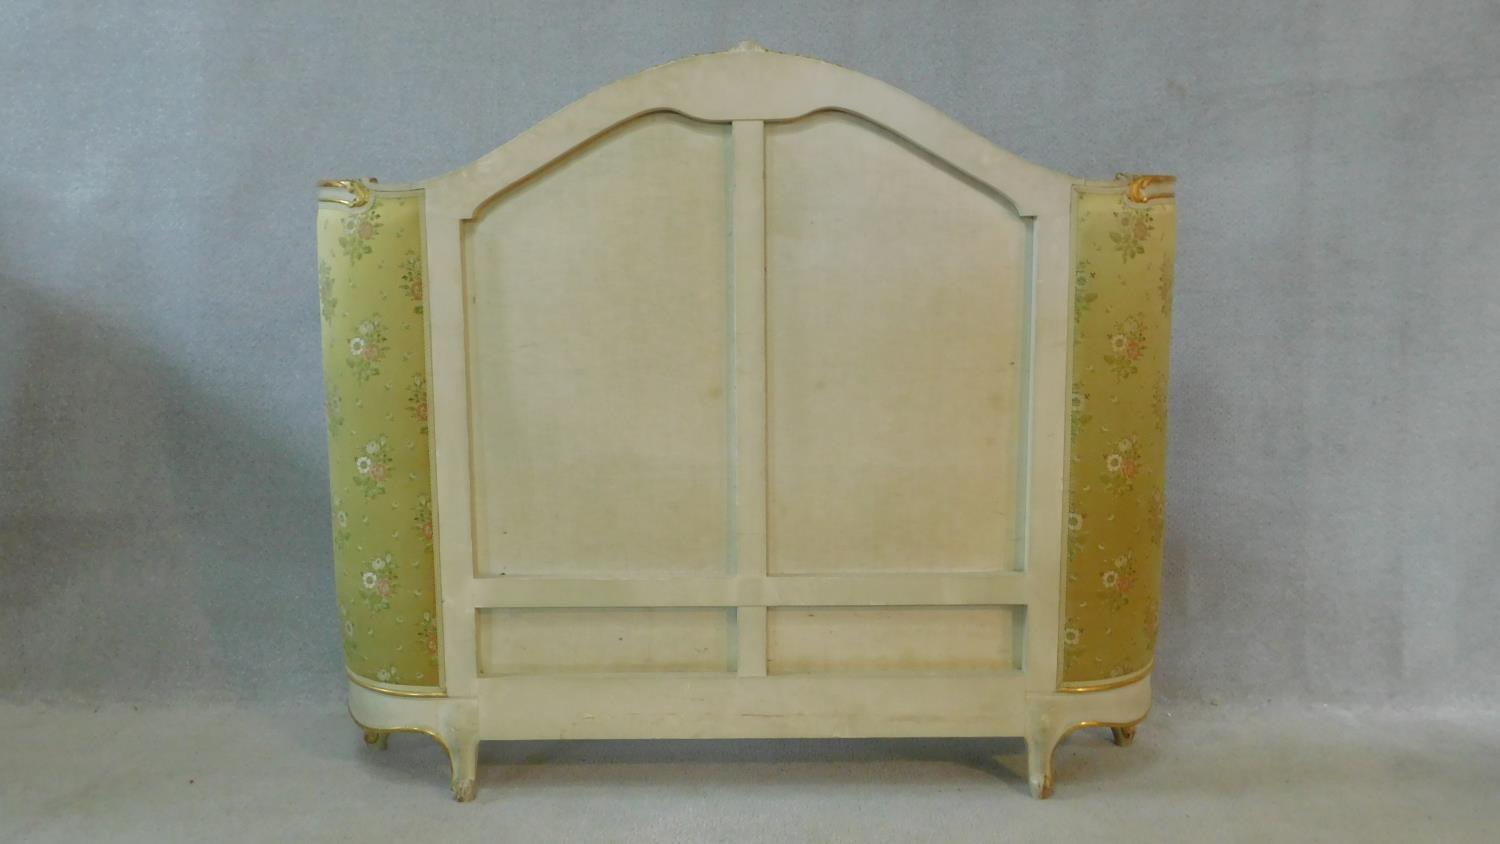 A mid century gilt and white painted bed head in floral damask resting on carved cabriole - Image 6 of 6